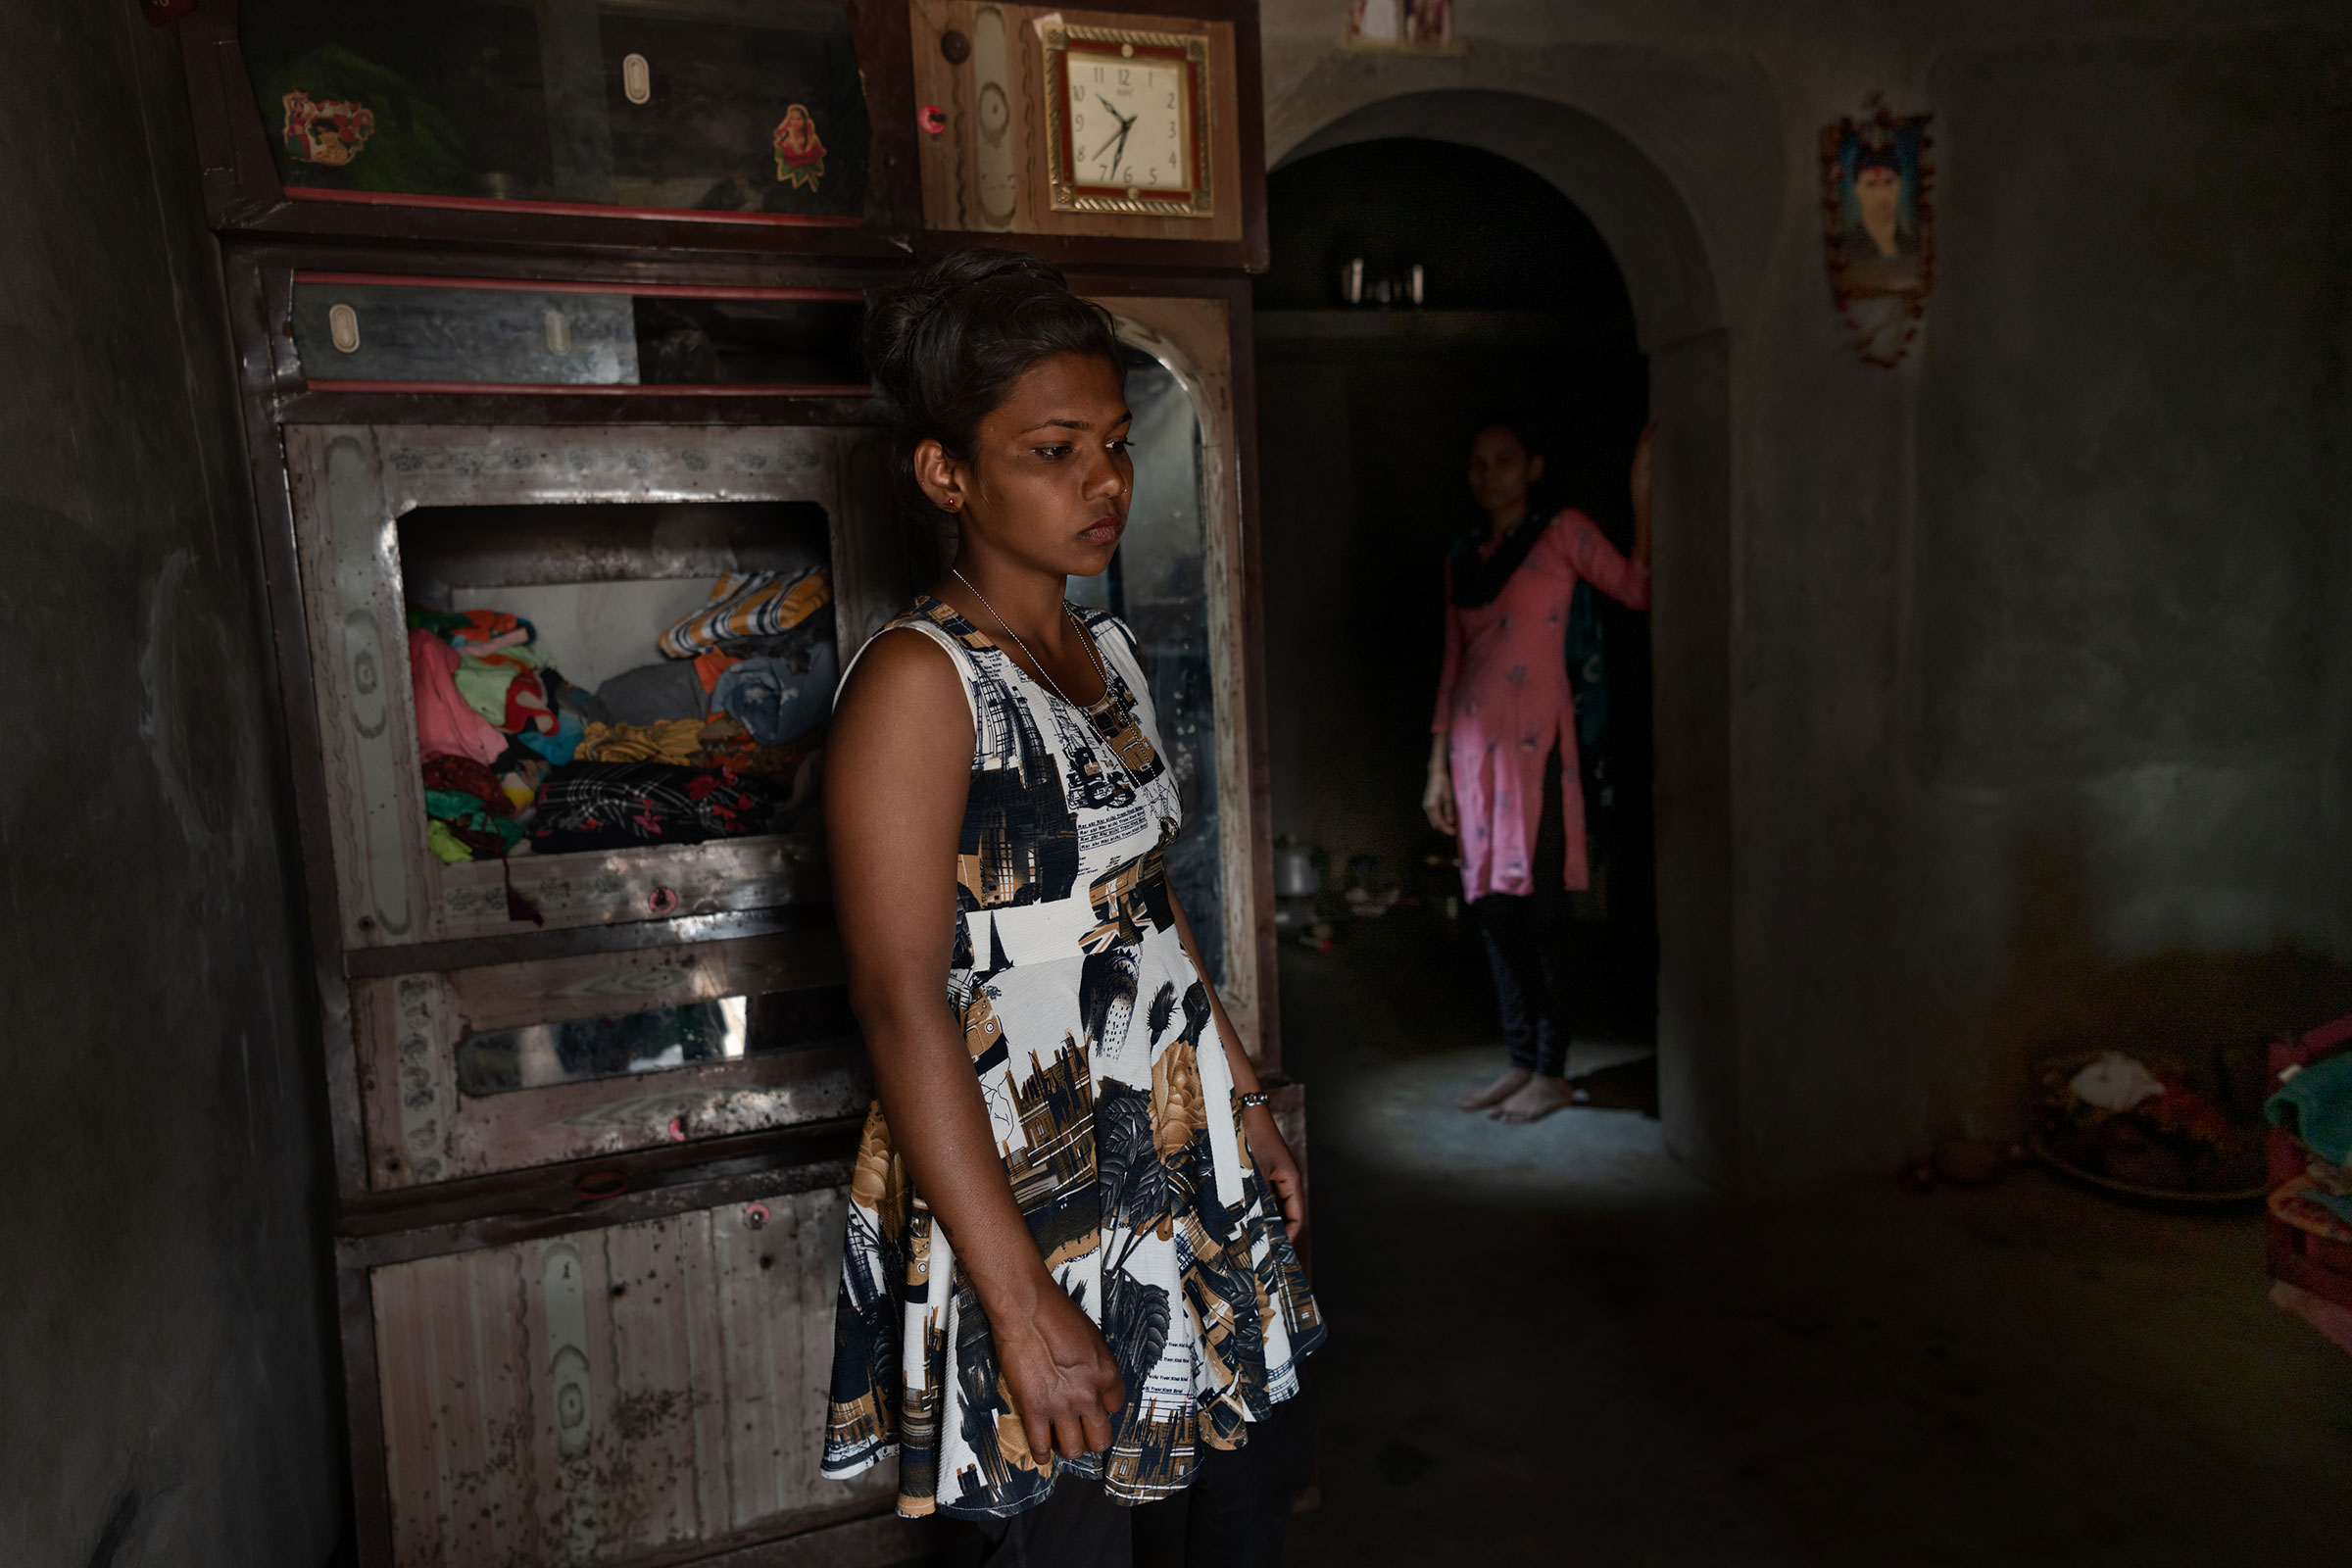 Savitri Vasava, 23, lives in Dakor, Gujarat, and is the mother of a 3-year-old. She plans to become a surrogate after seeing her sister-in-law build a house from the money she made from surrogacy. (Smita Sharma for TIME)